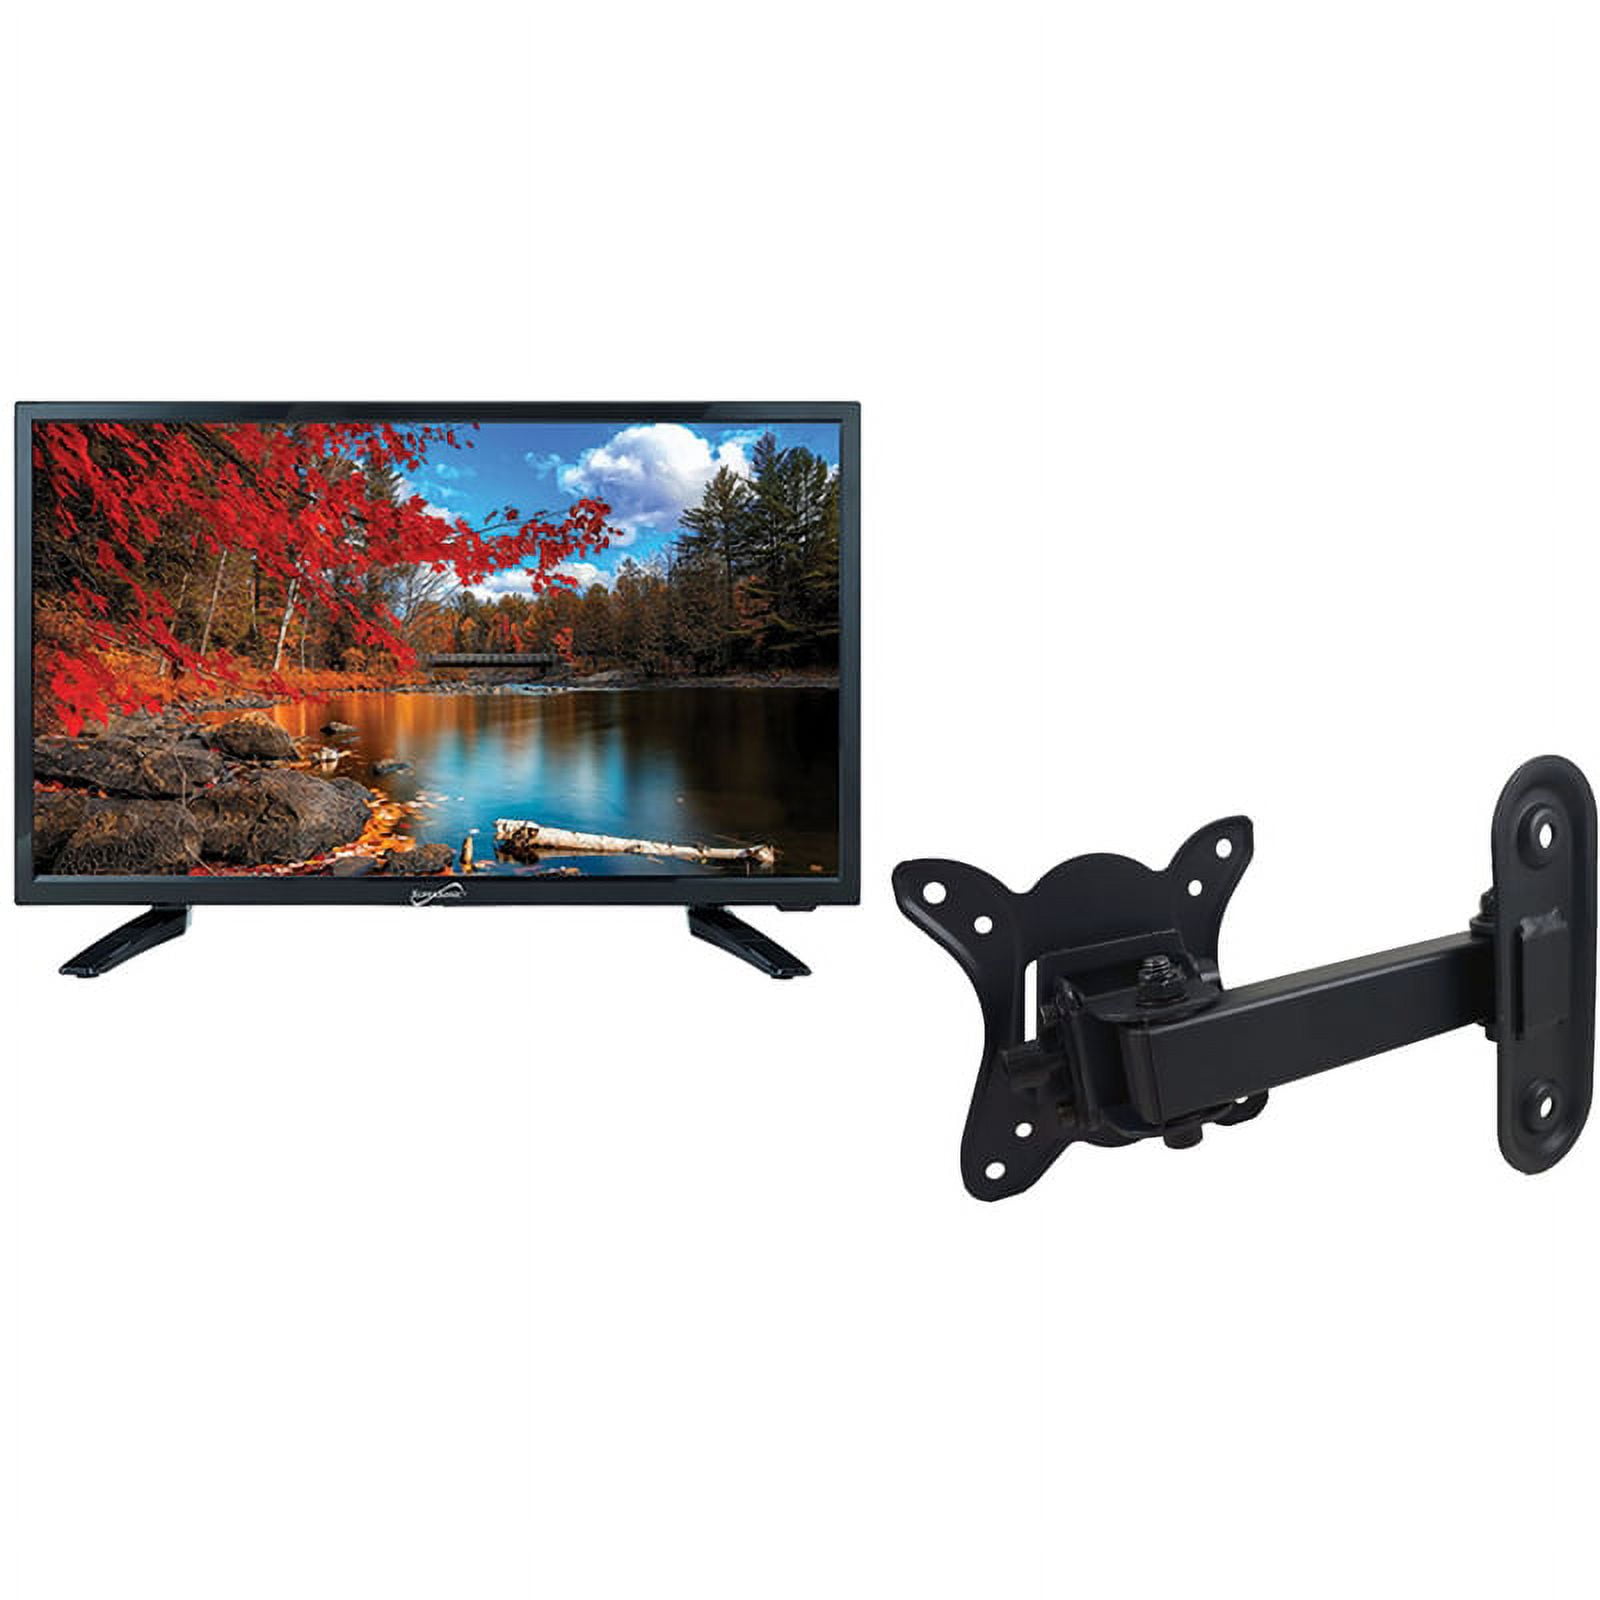  Supersonic SC-2211 22-Inch 1080p LED Widescreen HDTV with HDMI  Input (AC/DC Compatible) : Electronics